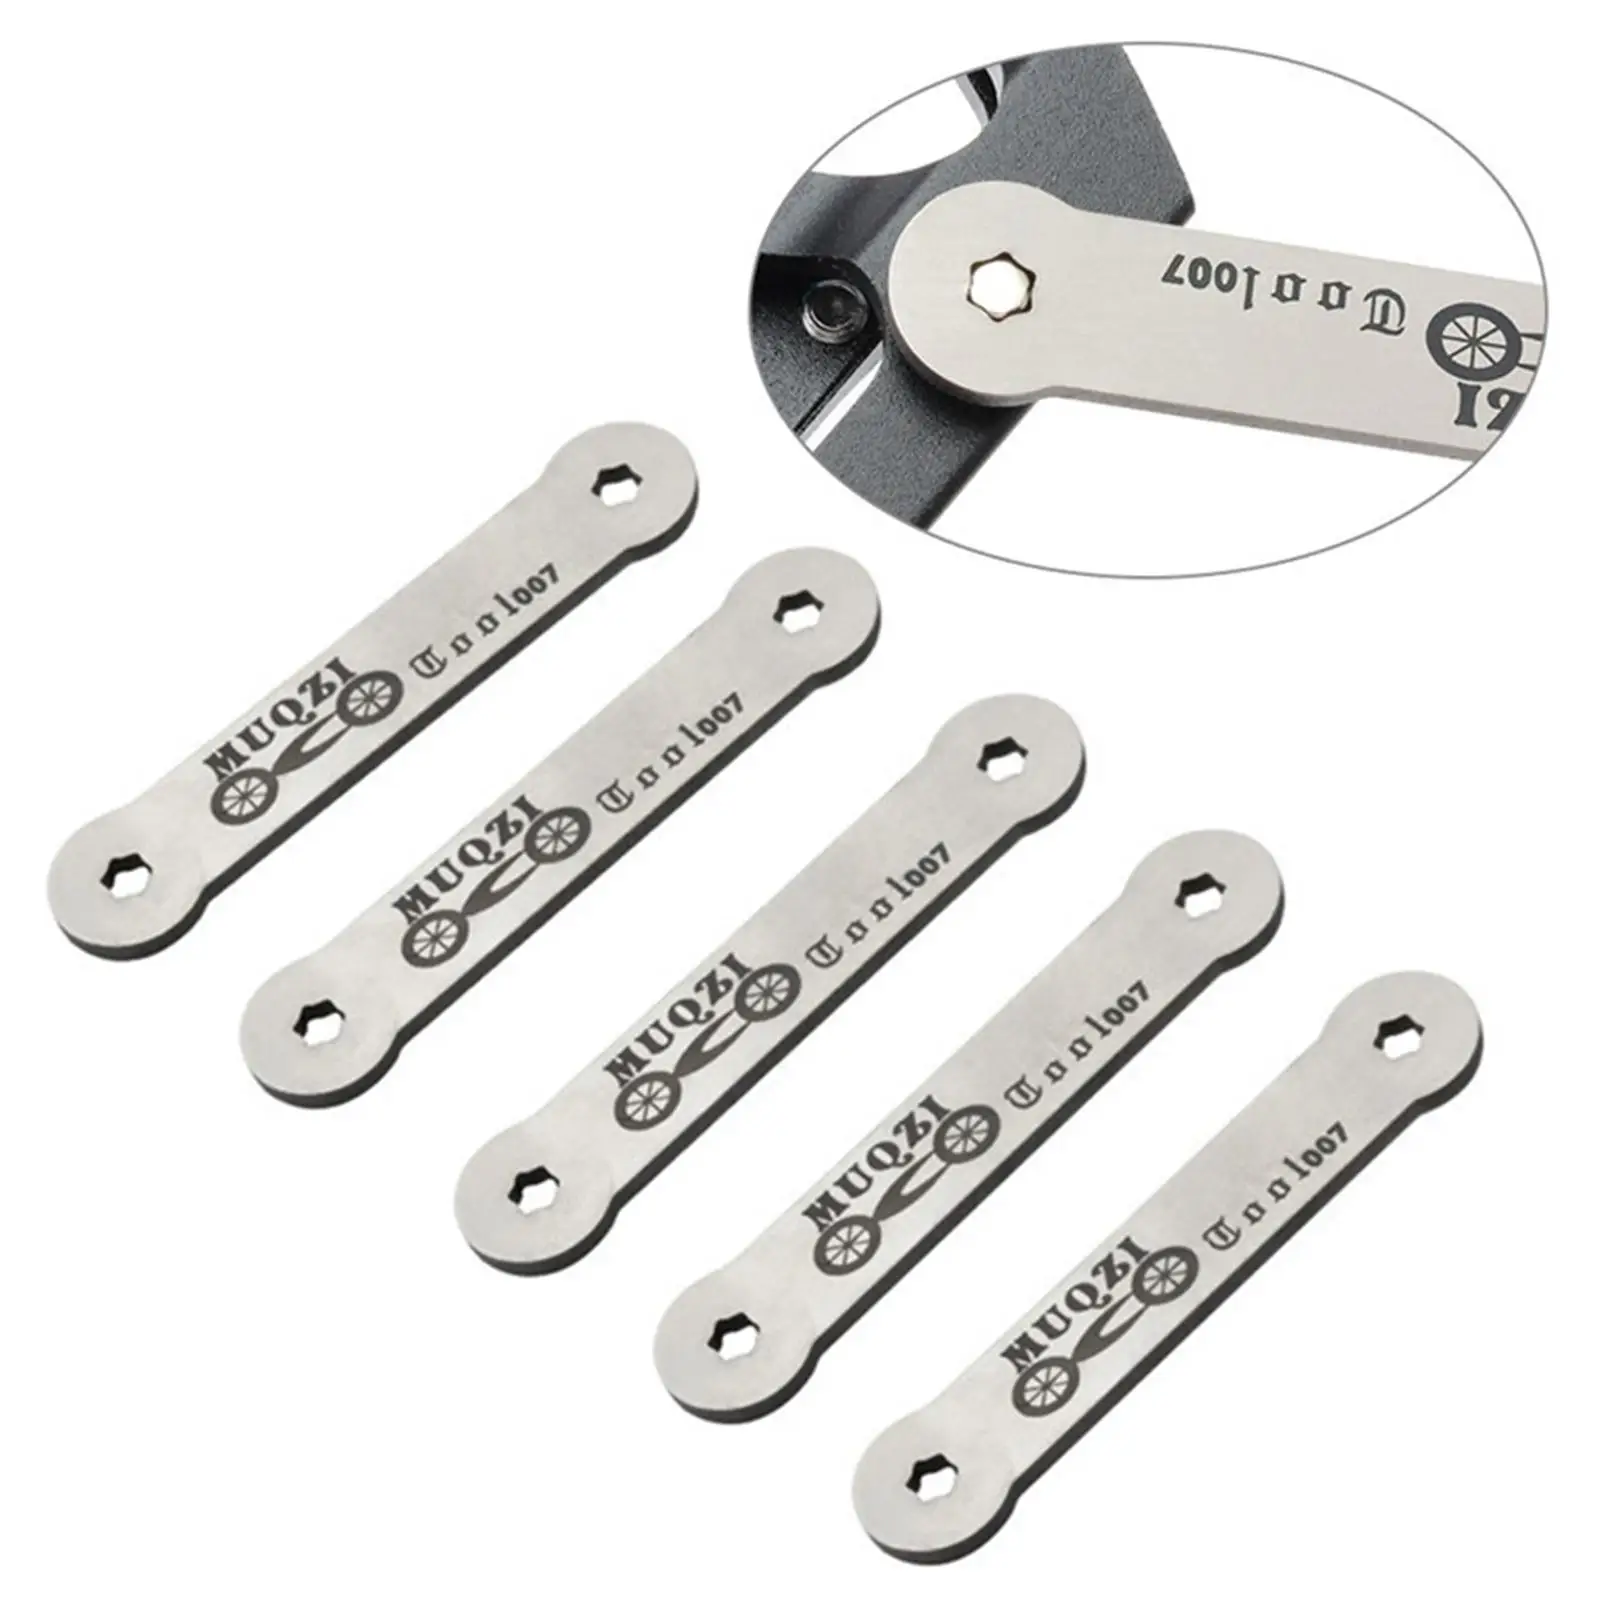 5Pieces Bike Pedal Wrench Removal Tool High-Quality for Repair Bike Biking